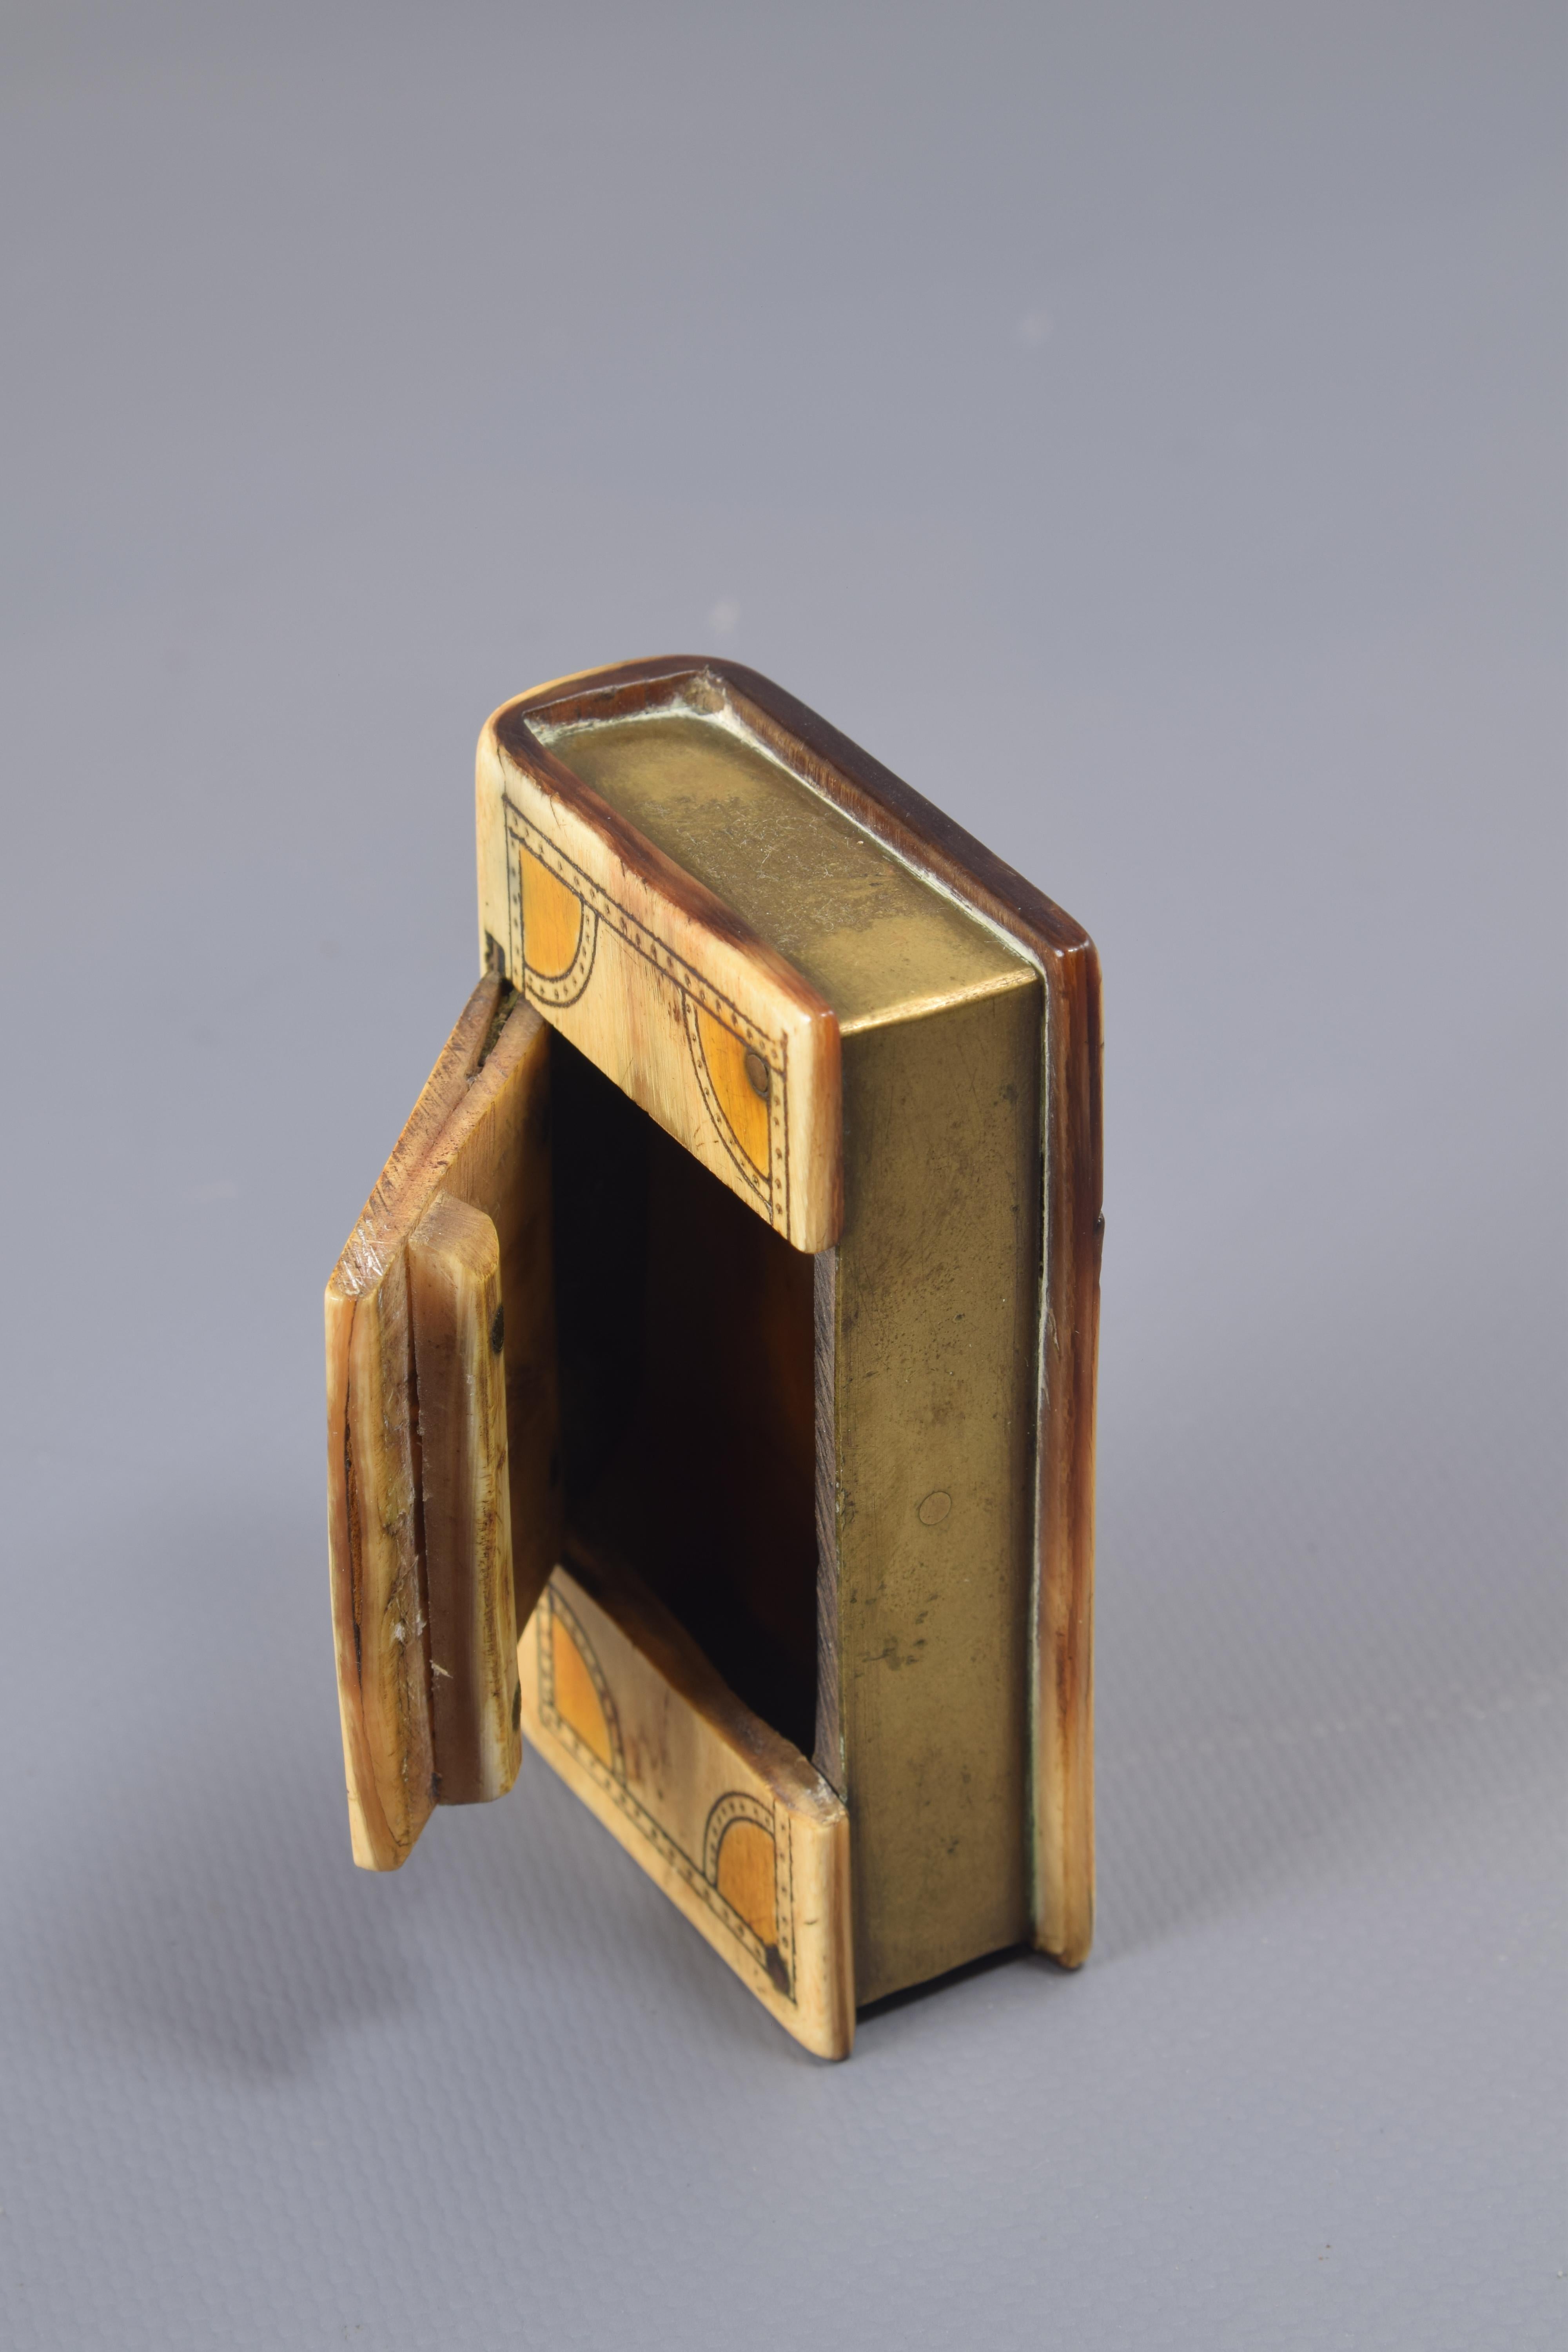 European Book Shaped Box, Horn or Antler, Metal, 19th Century For Sale